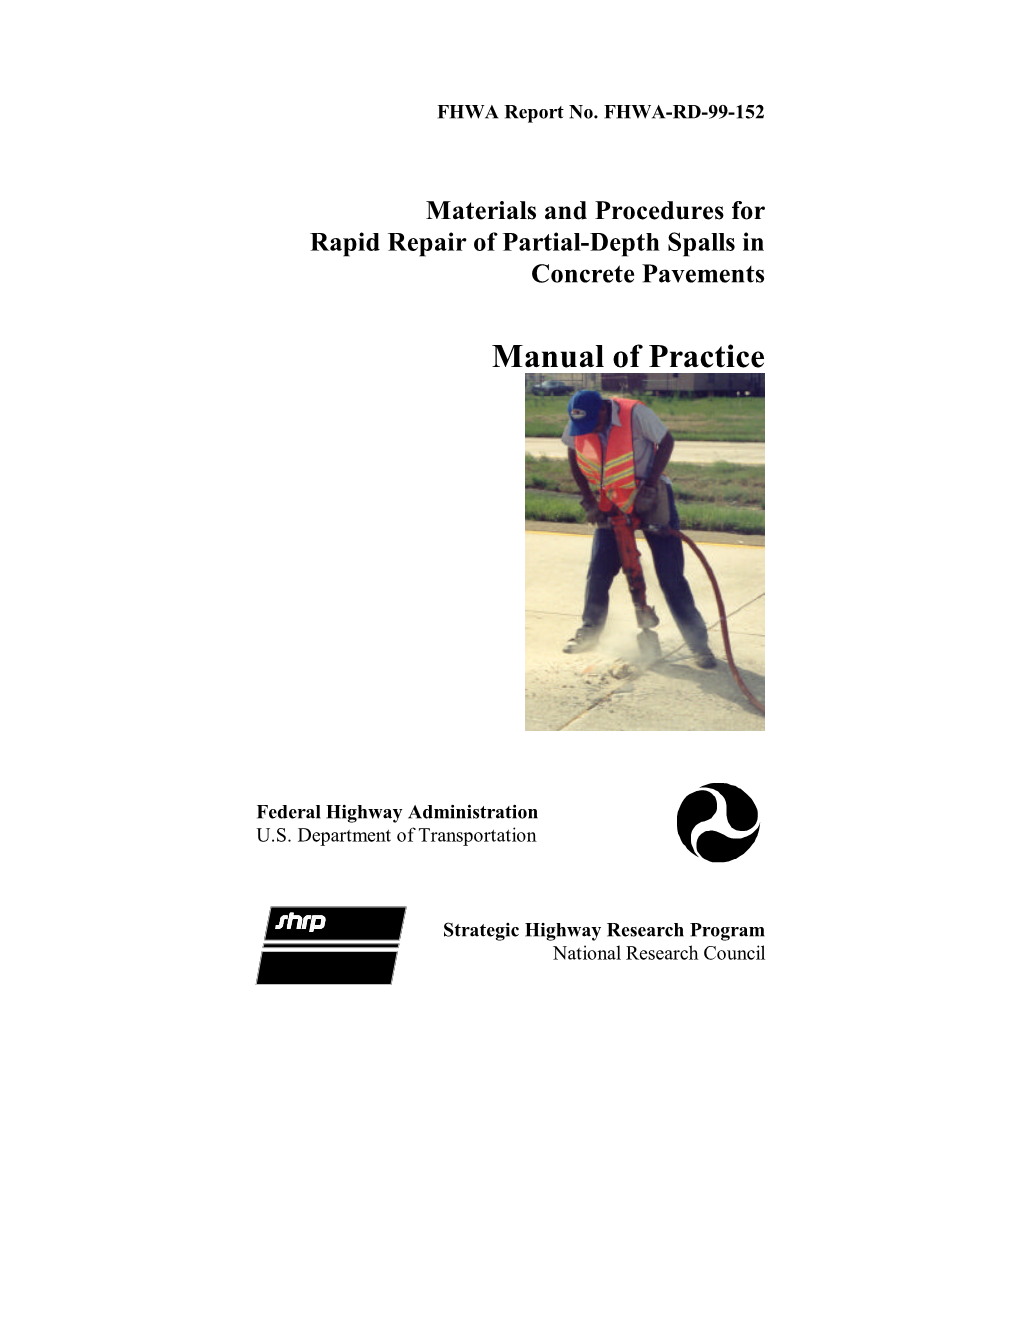 Manual of Practice